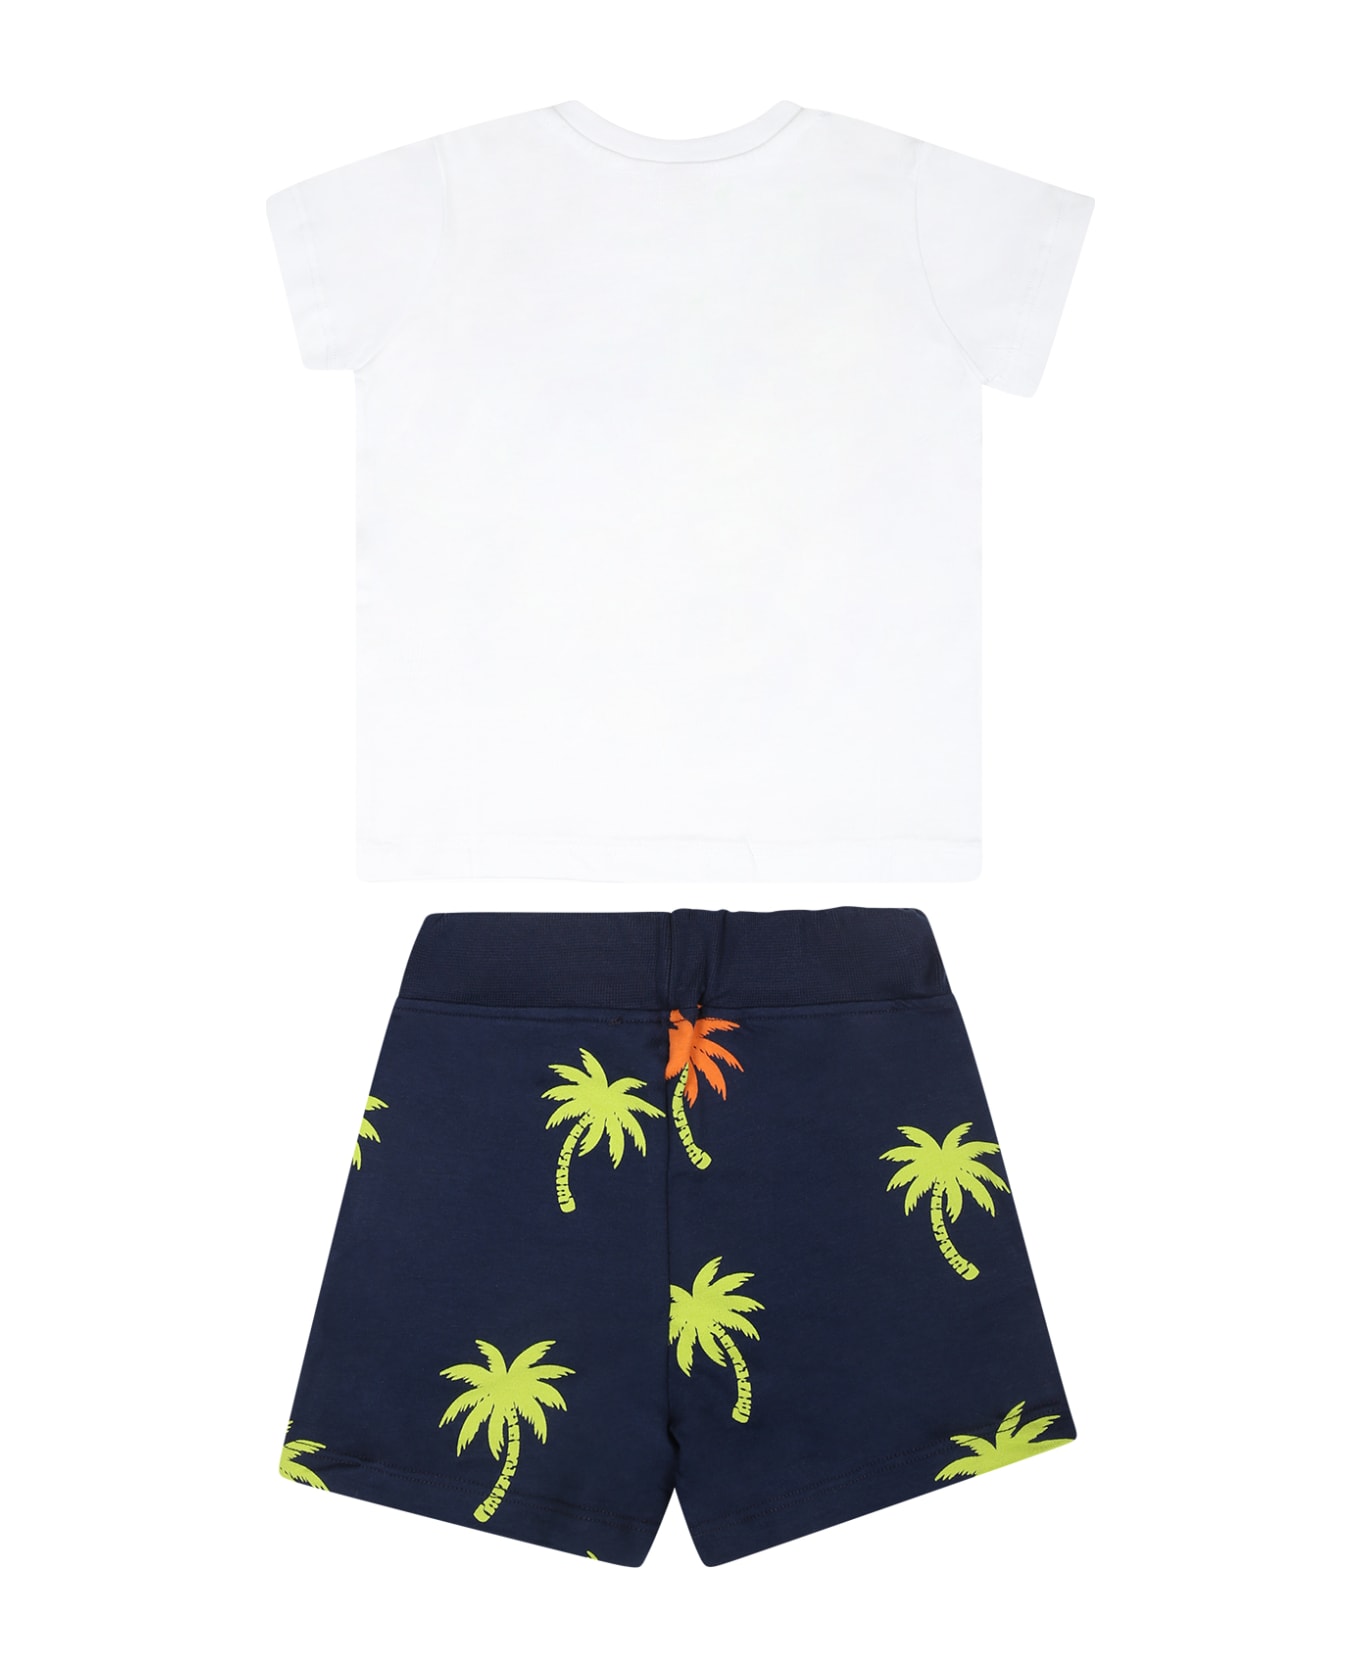 MSGM White Suit For Baby Boy With Logo And Palm Tree - Multicolor